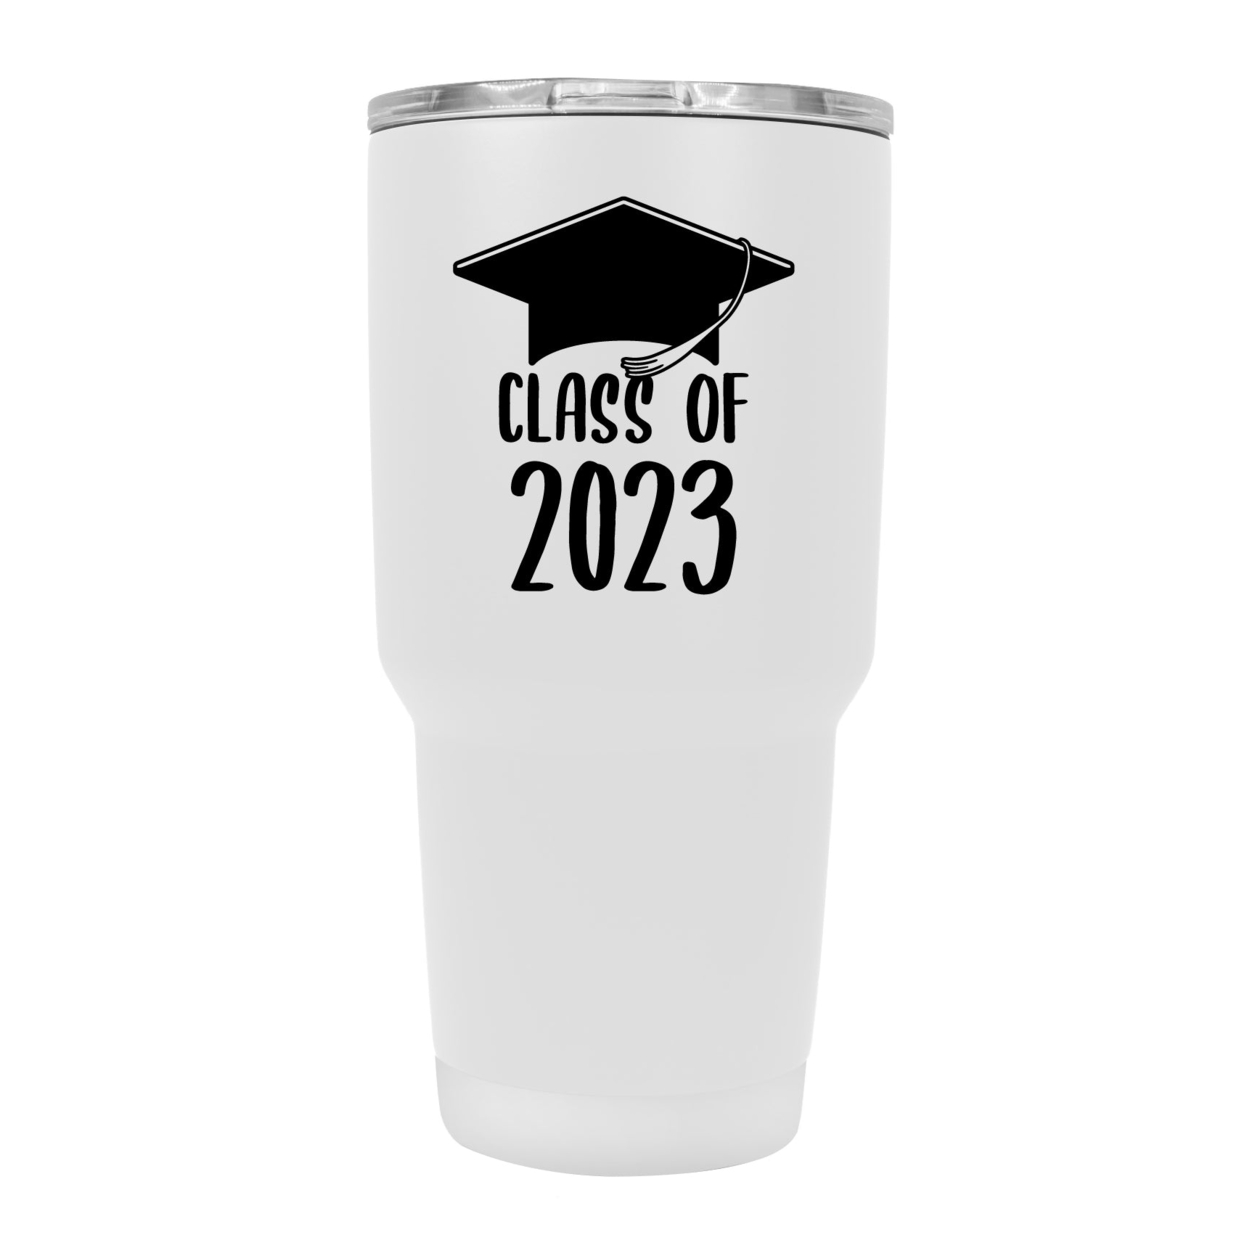 Class Of 2023 Graduation 24 Oz Insulated Stainless Steel Tumbler Navy - Coral